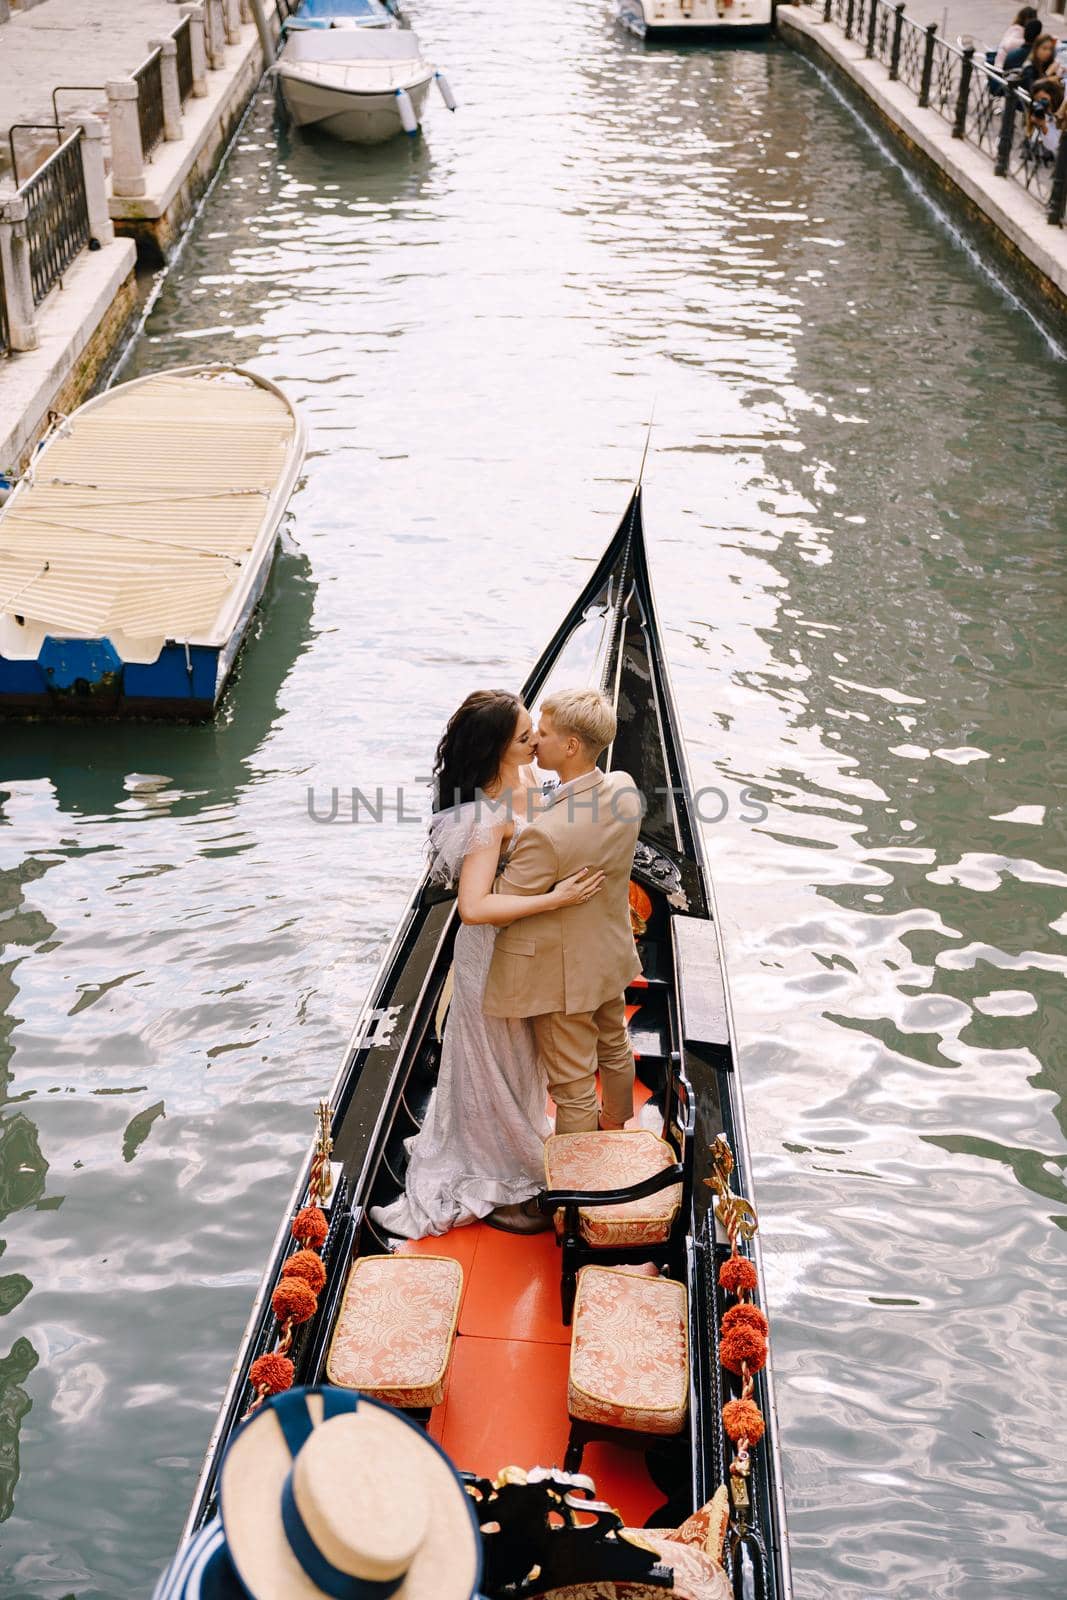 Italy wedding in Venice. A gondolier rolls a bride and groom in a classic wooden gondola along a narrow Venetian canal. Newlyweds are standing in the boat, rear view. by Nadtochiy